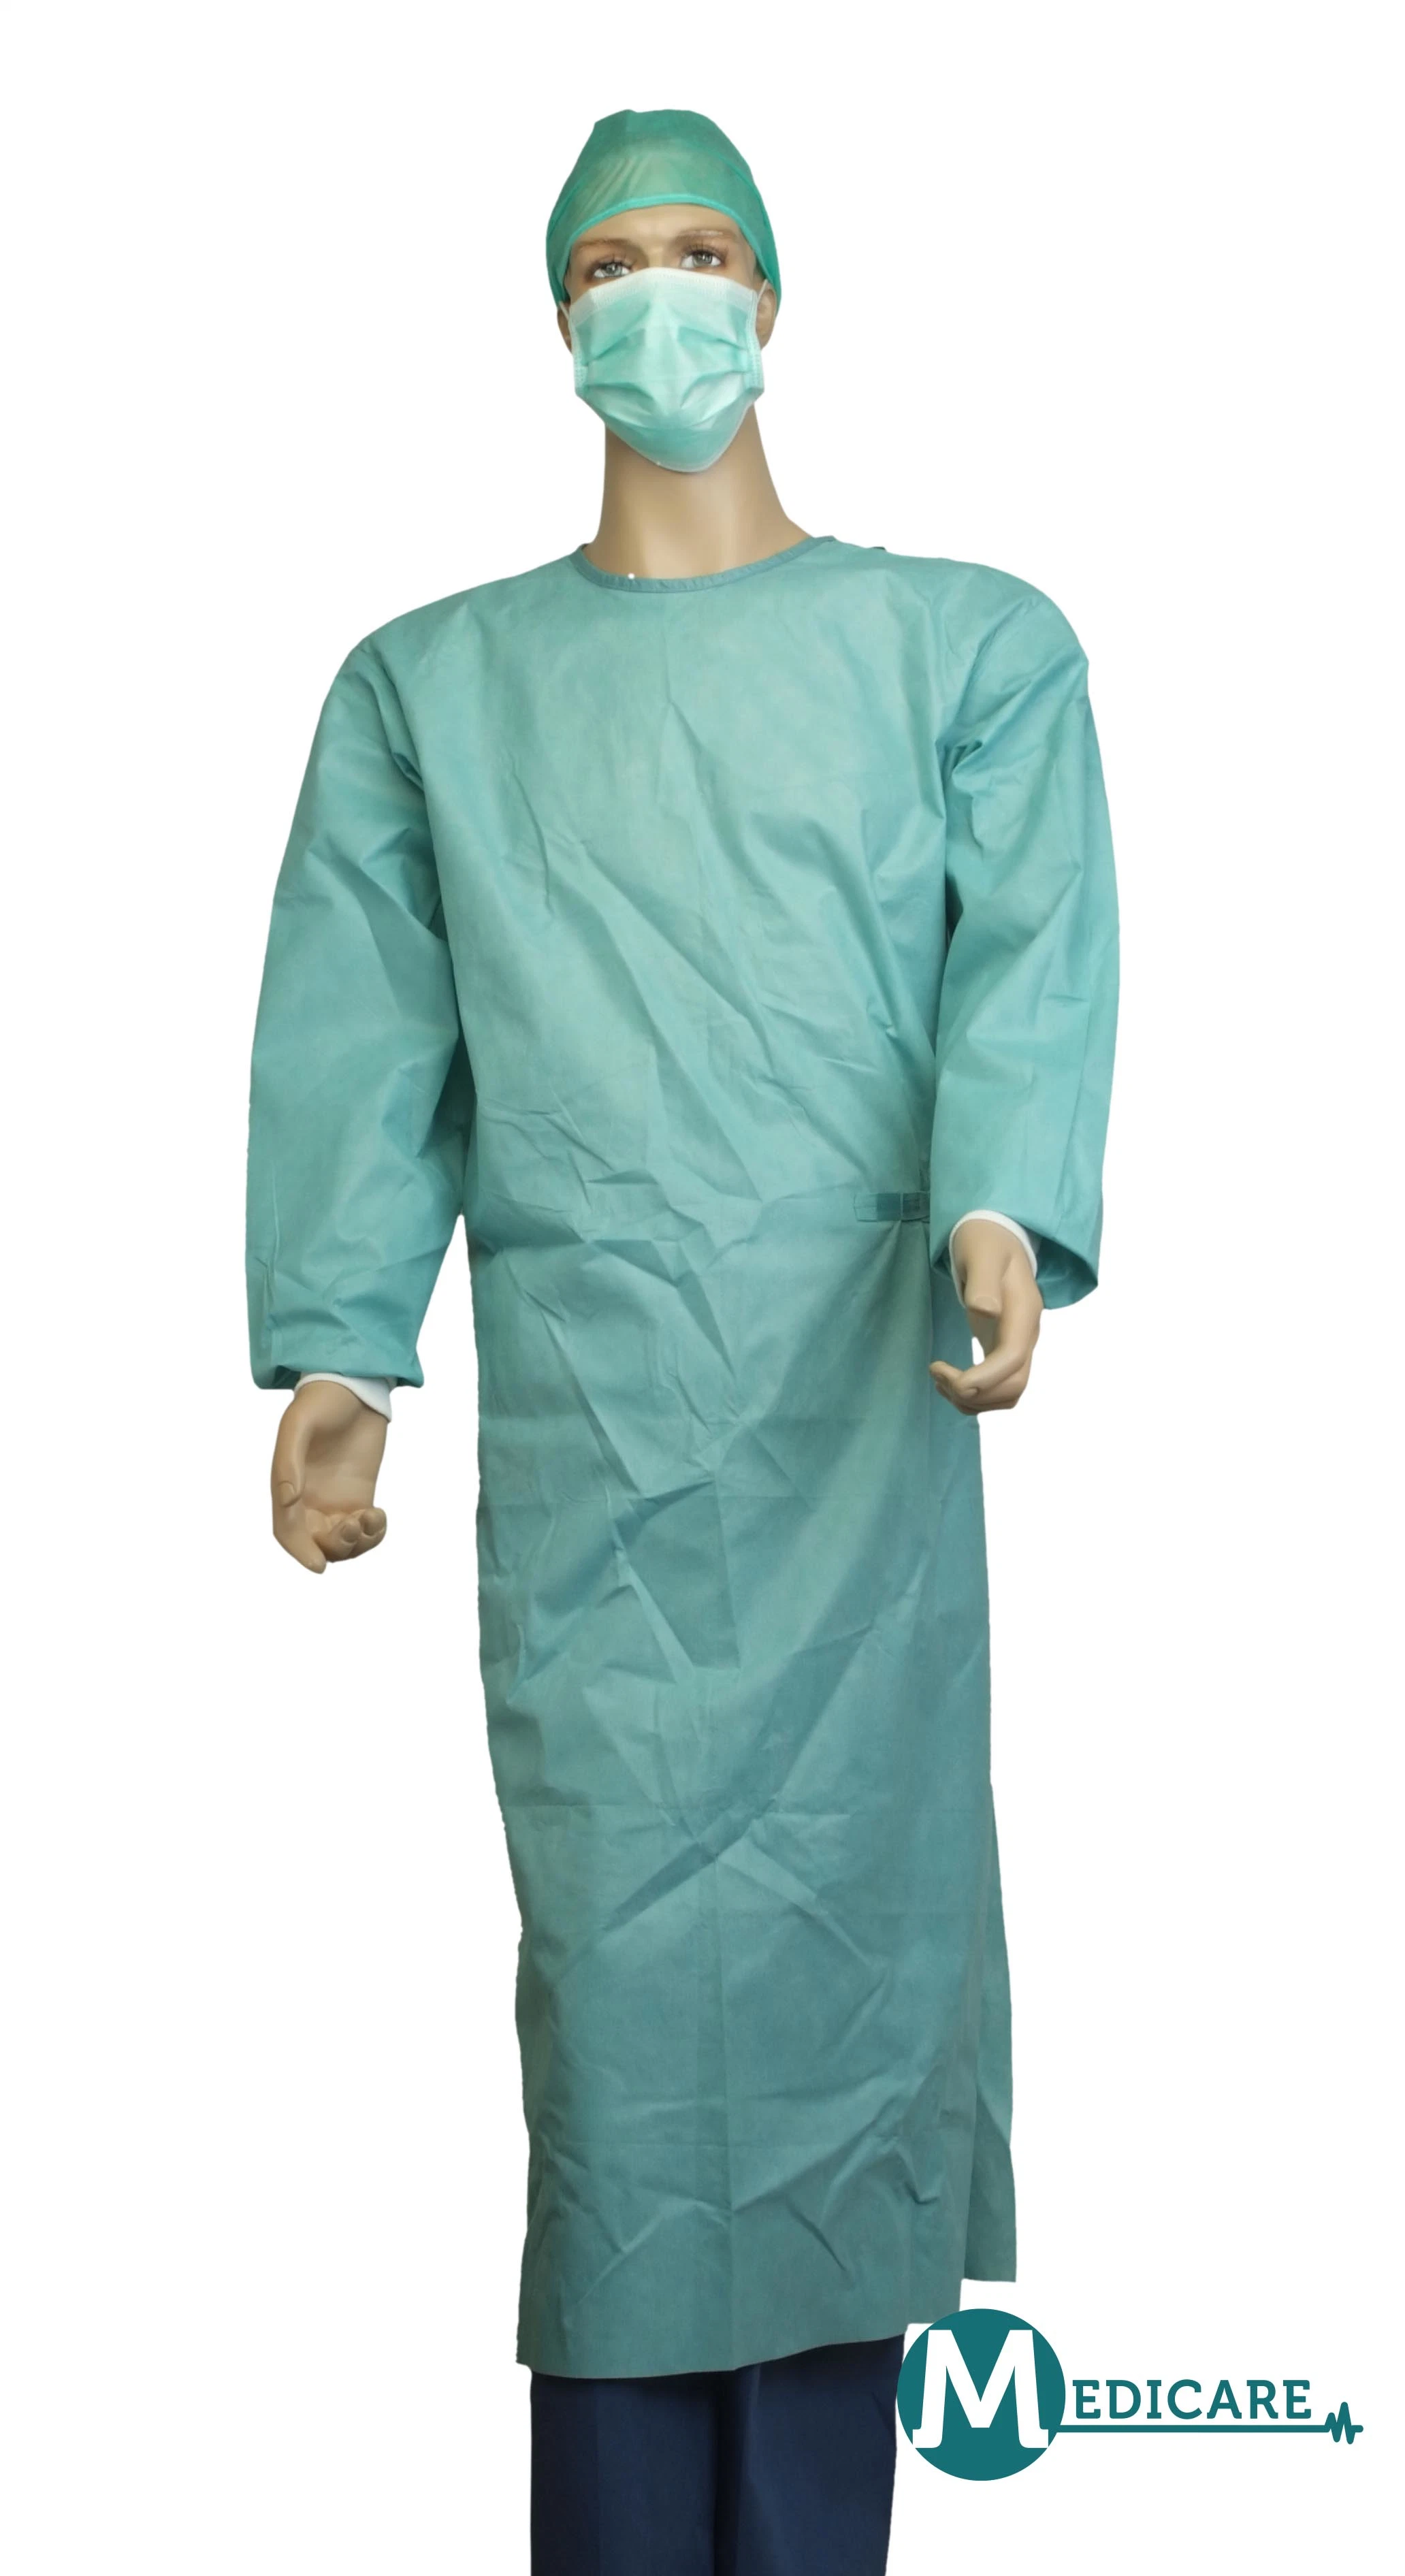 Le SGM-SAR chirurgical chirurgical Blouse, Non-Woven robe robe CHIRURGICAUX jetables